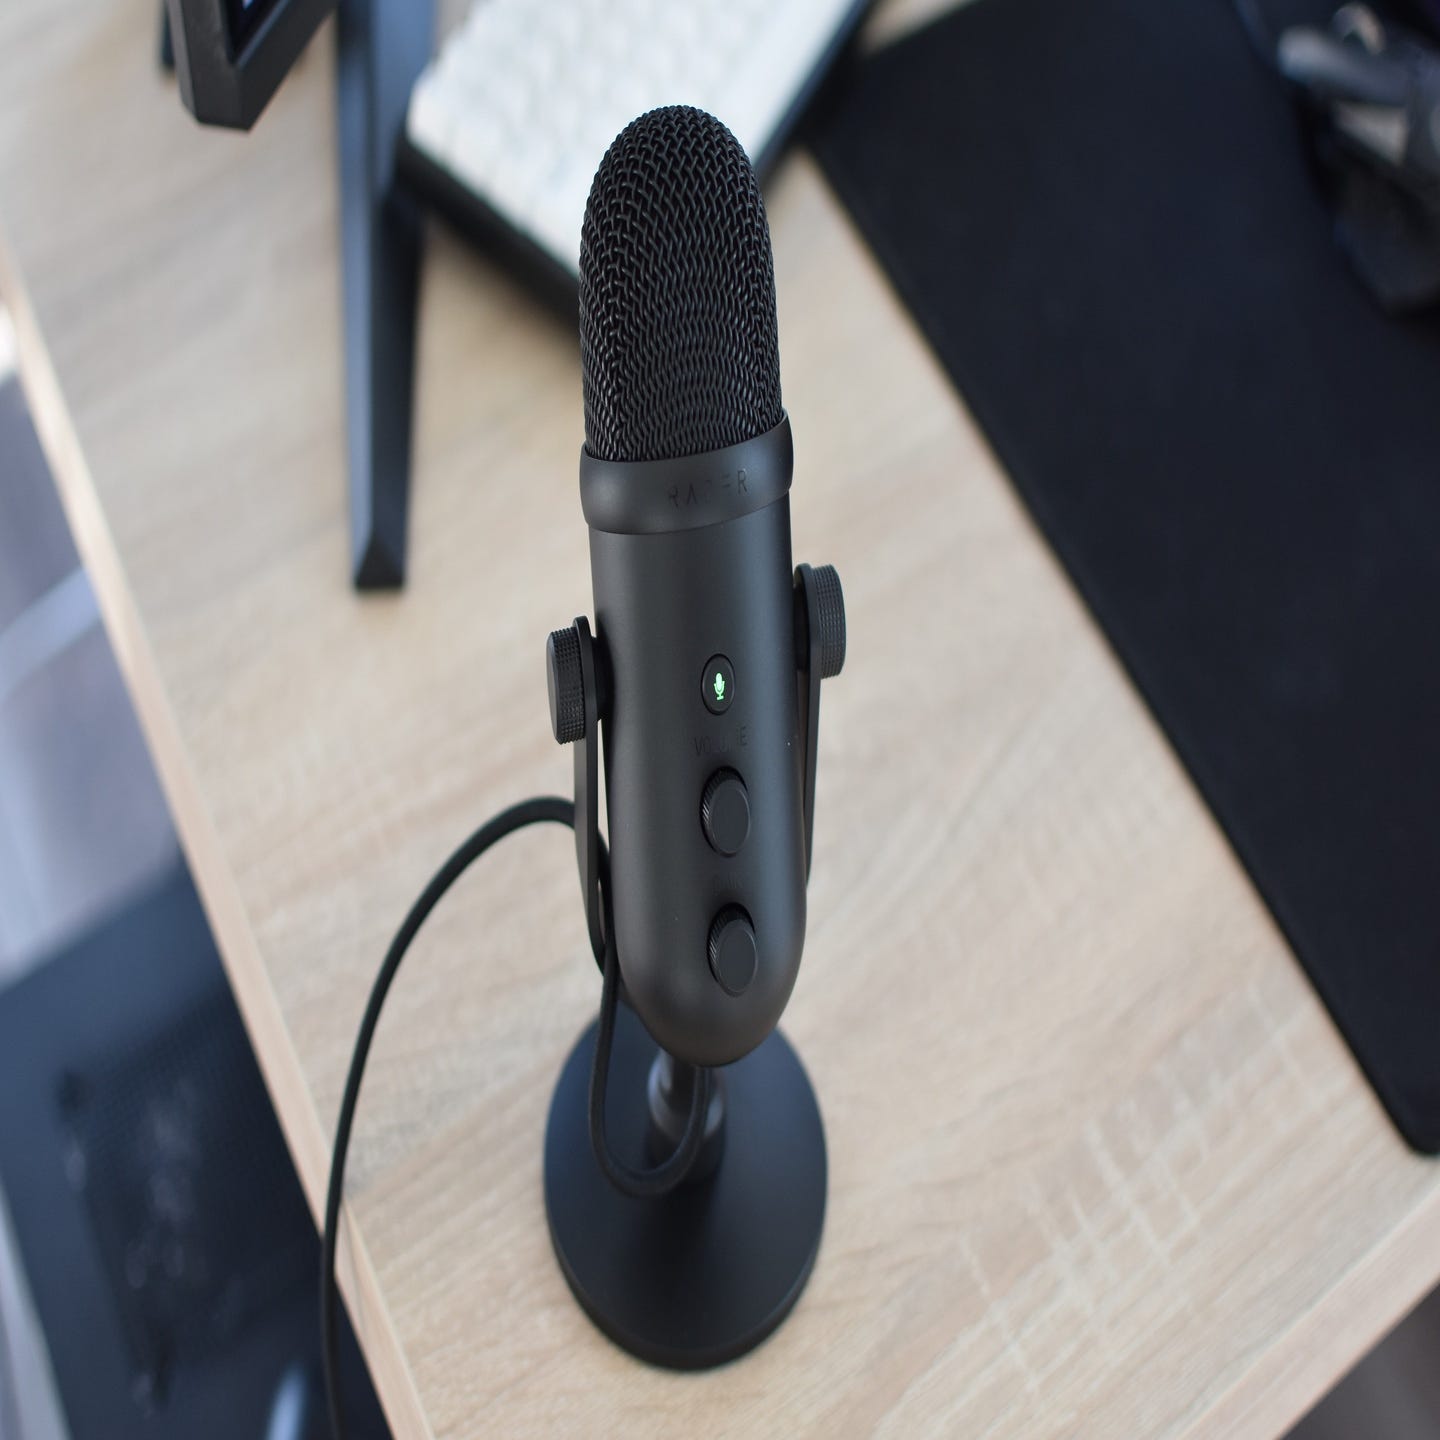 Best Gaming Microphones for 2023